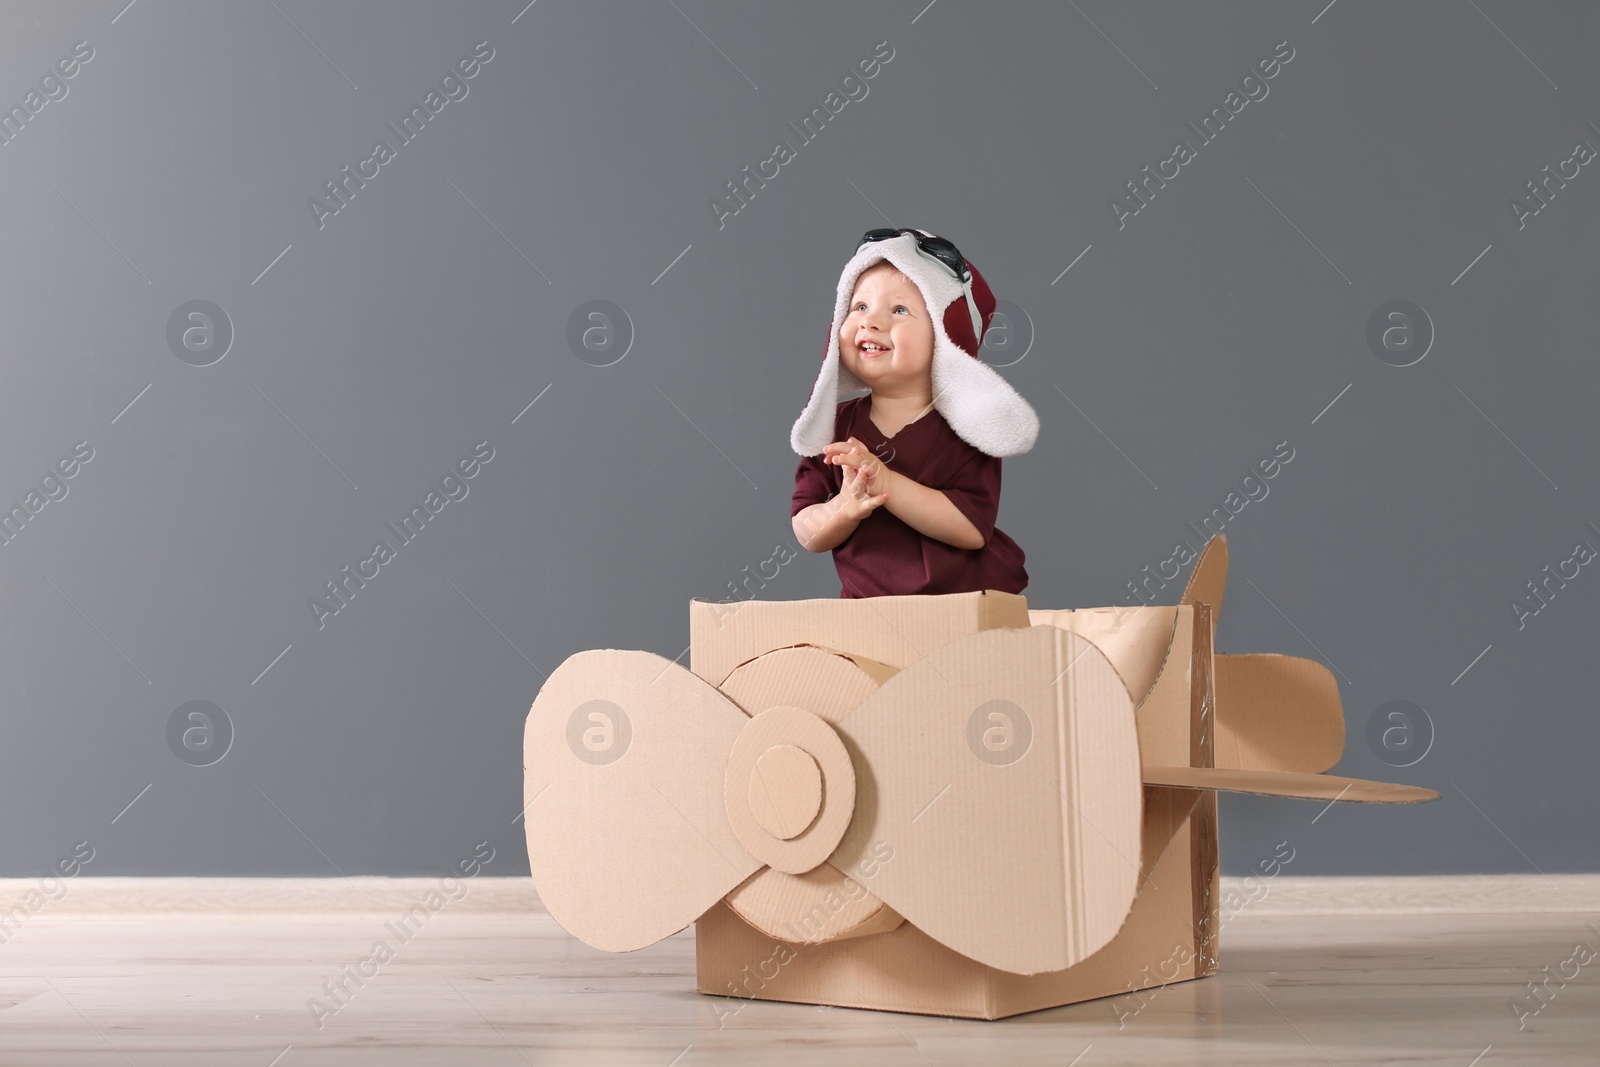 Photo of Adorable little child playing with cardboard plane indoors